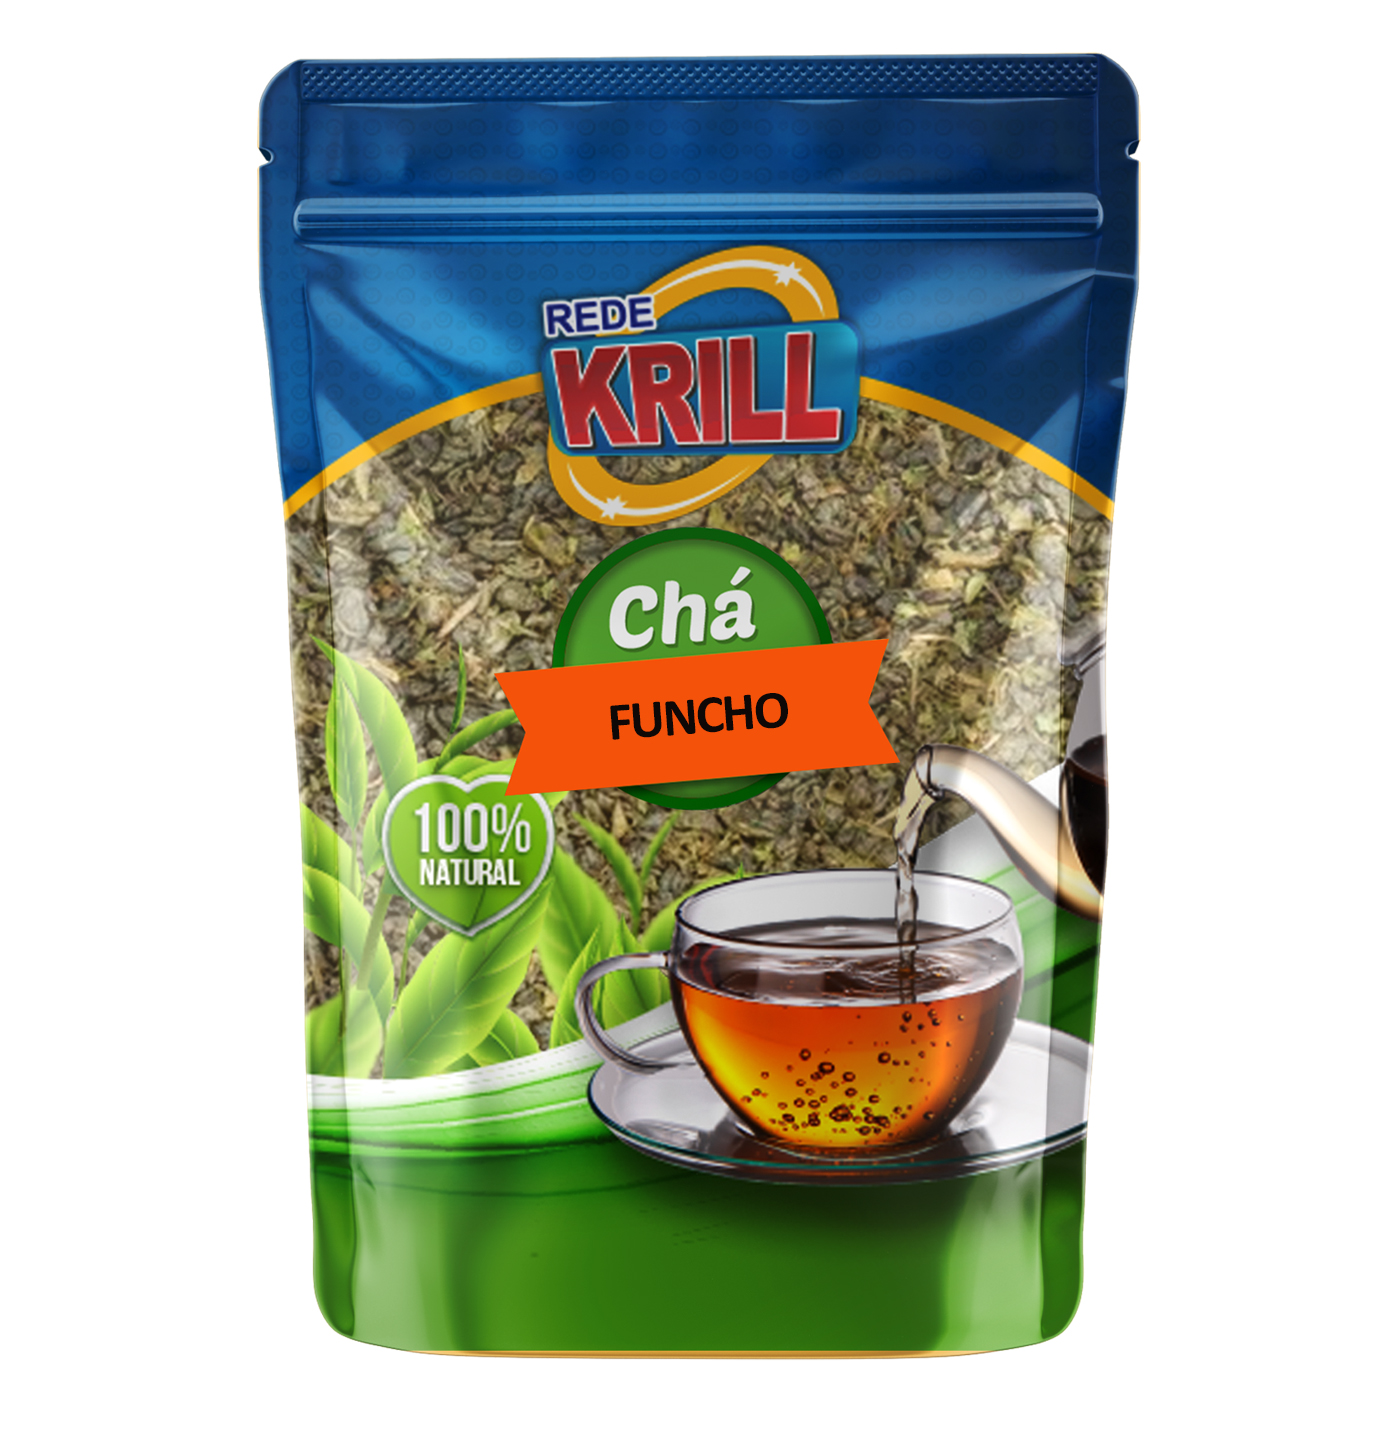 7898654862364 - CHA REDE KRILL FUNCHO SC 50G